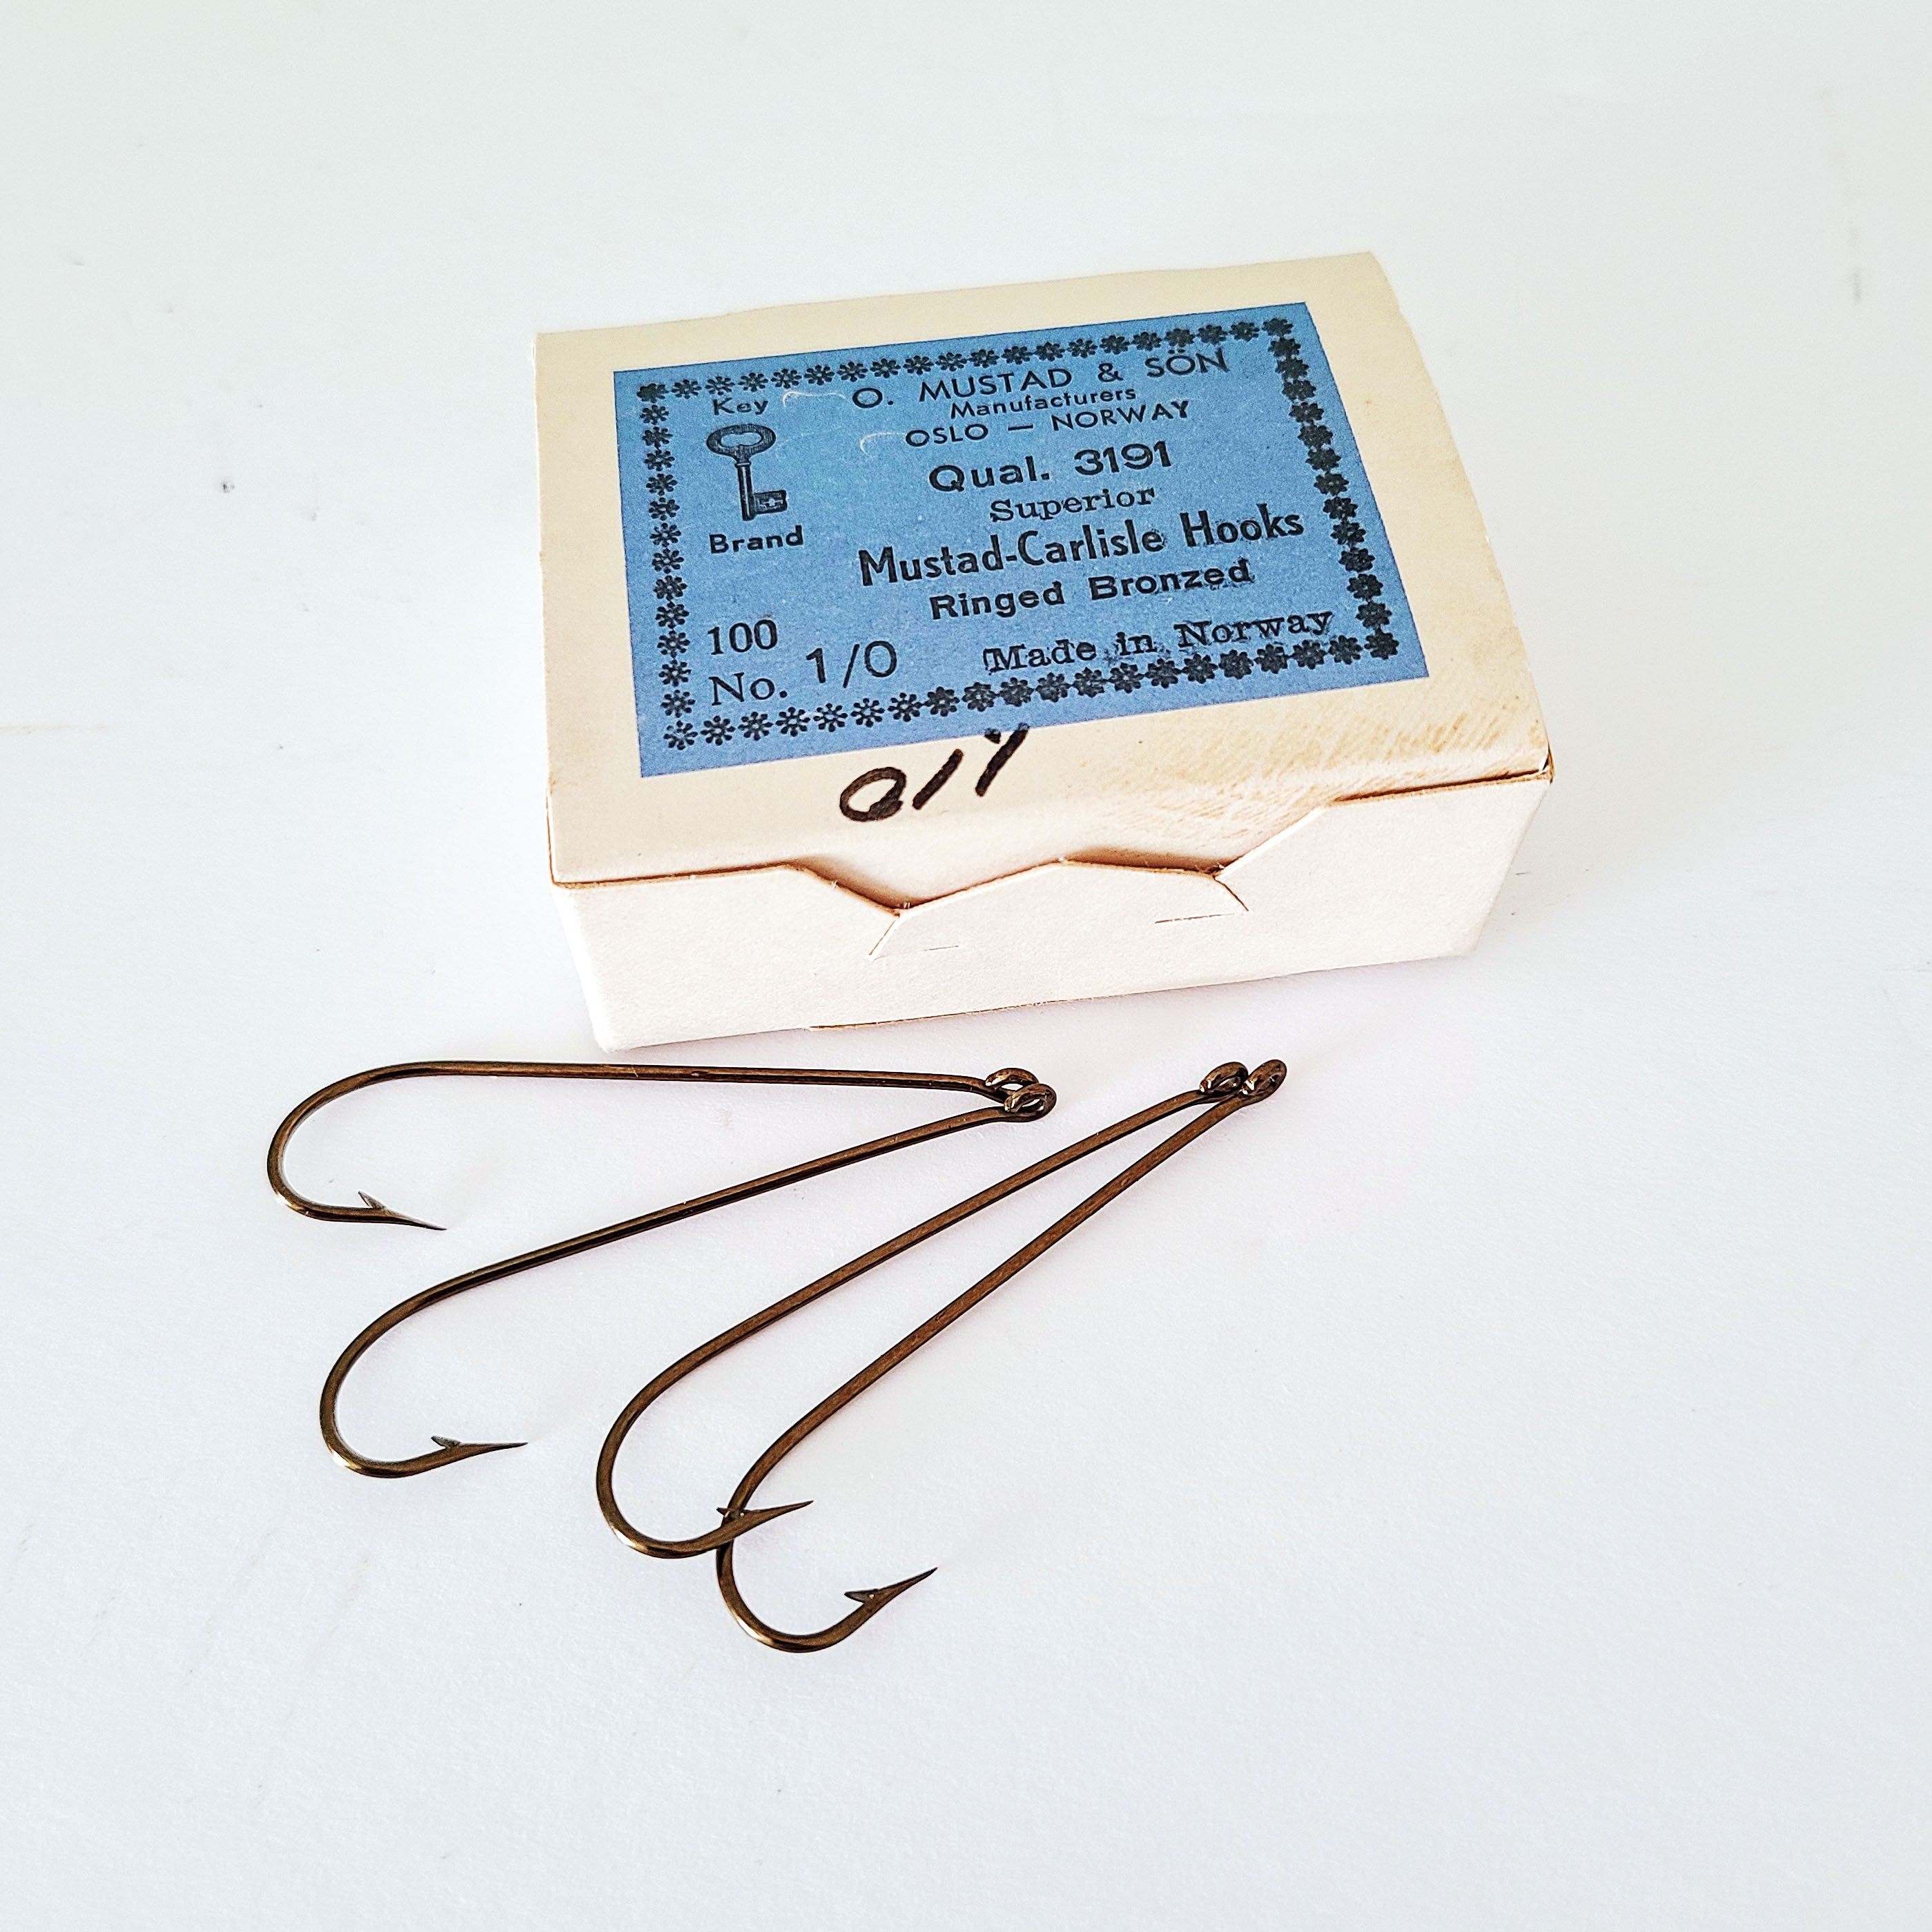 Vintage Mustad & Son Fish Hooks, Mustad-carlisle Hooks, Size No.1/0, 100  Pieces, Key Brand Made in Norway, New 2 Ringed Bronzed Hooks -  Canada